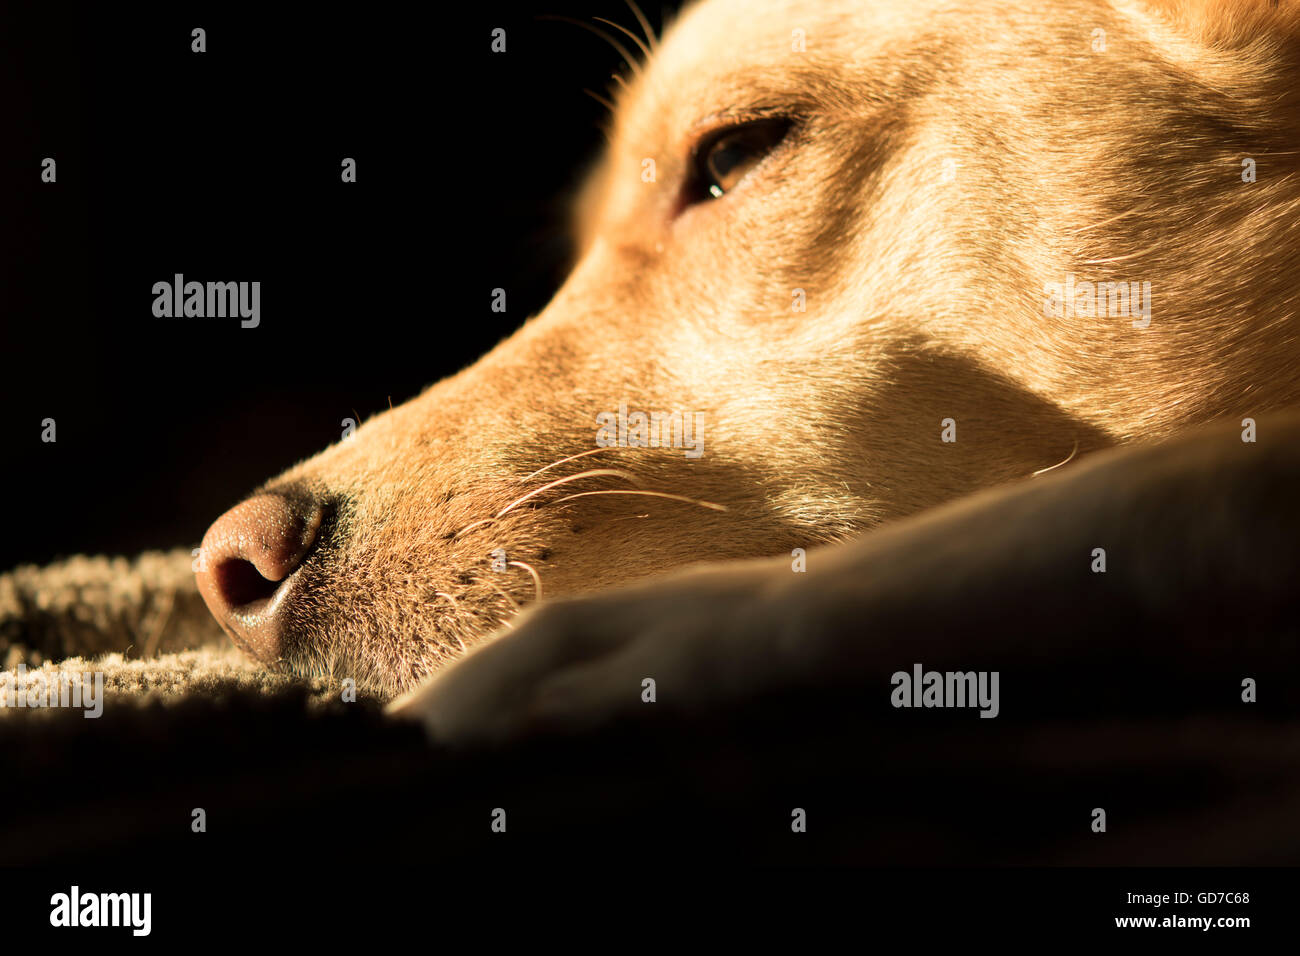 Close-up of Sleepy Dog Banque D'Images